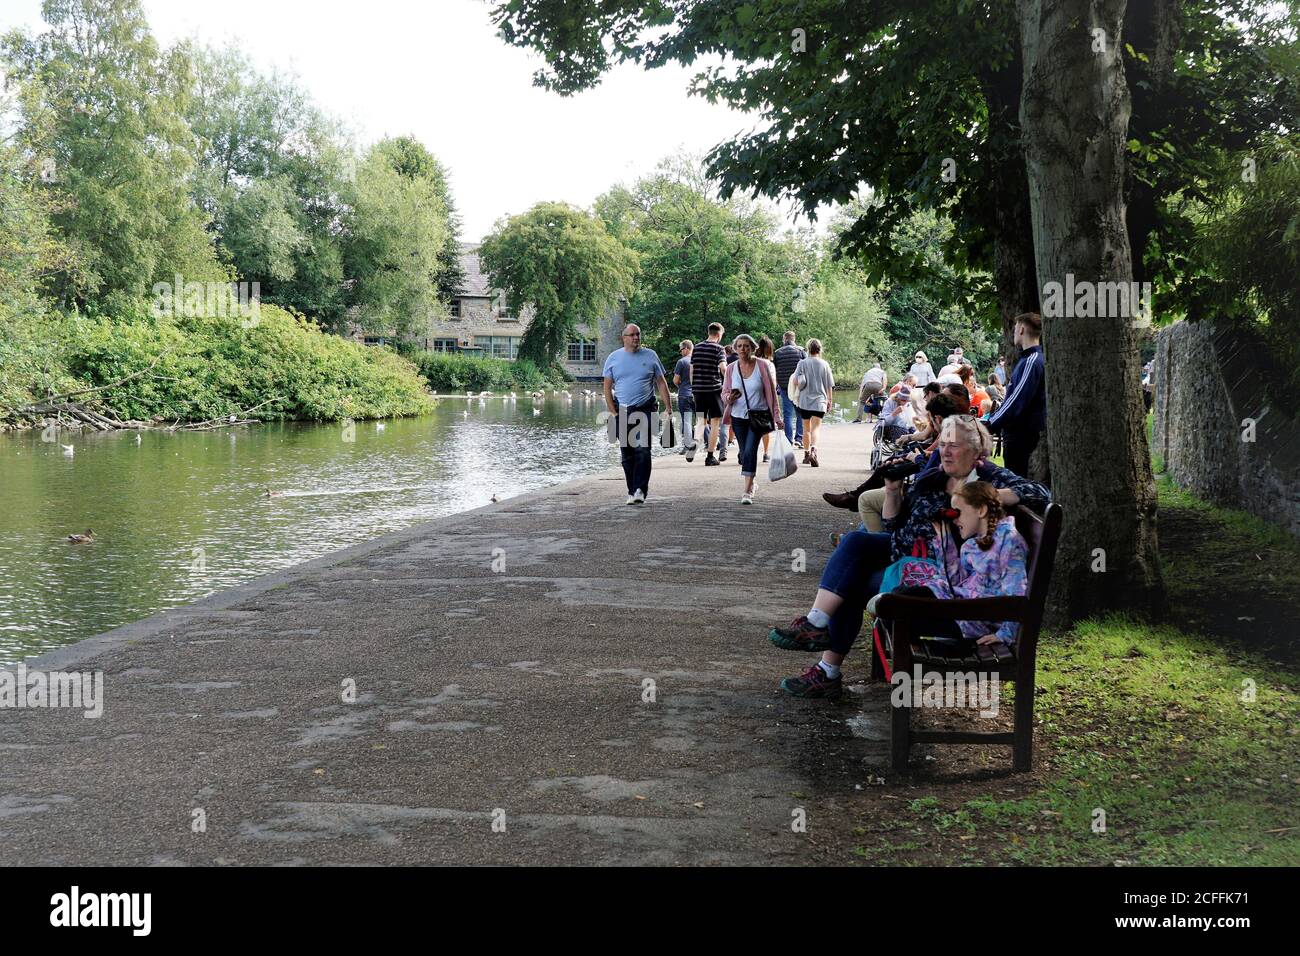 Bakewell, Derbyshire, UK.  August 24, 2020. Families of tourists and locals enjoying the nature on the river Wye at Bakewell in Derbyshire, UK. Stock Photo